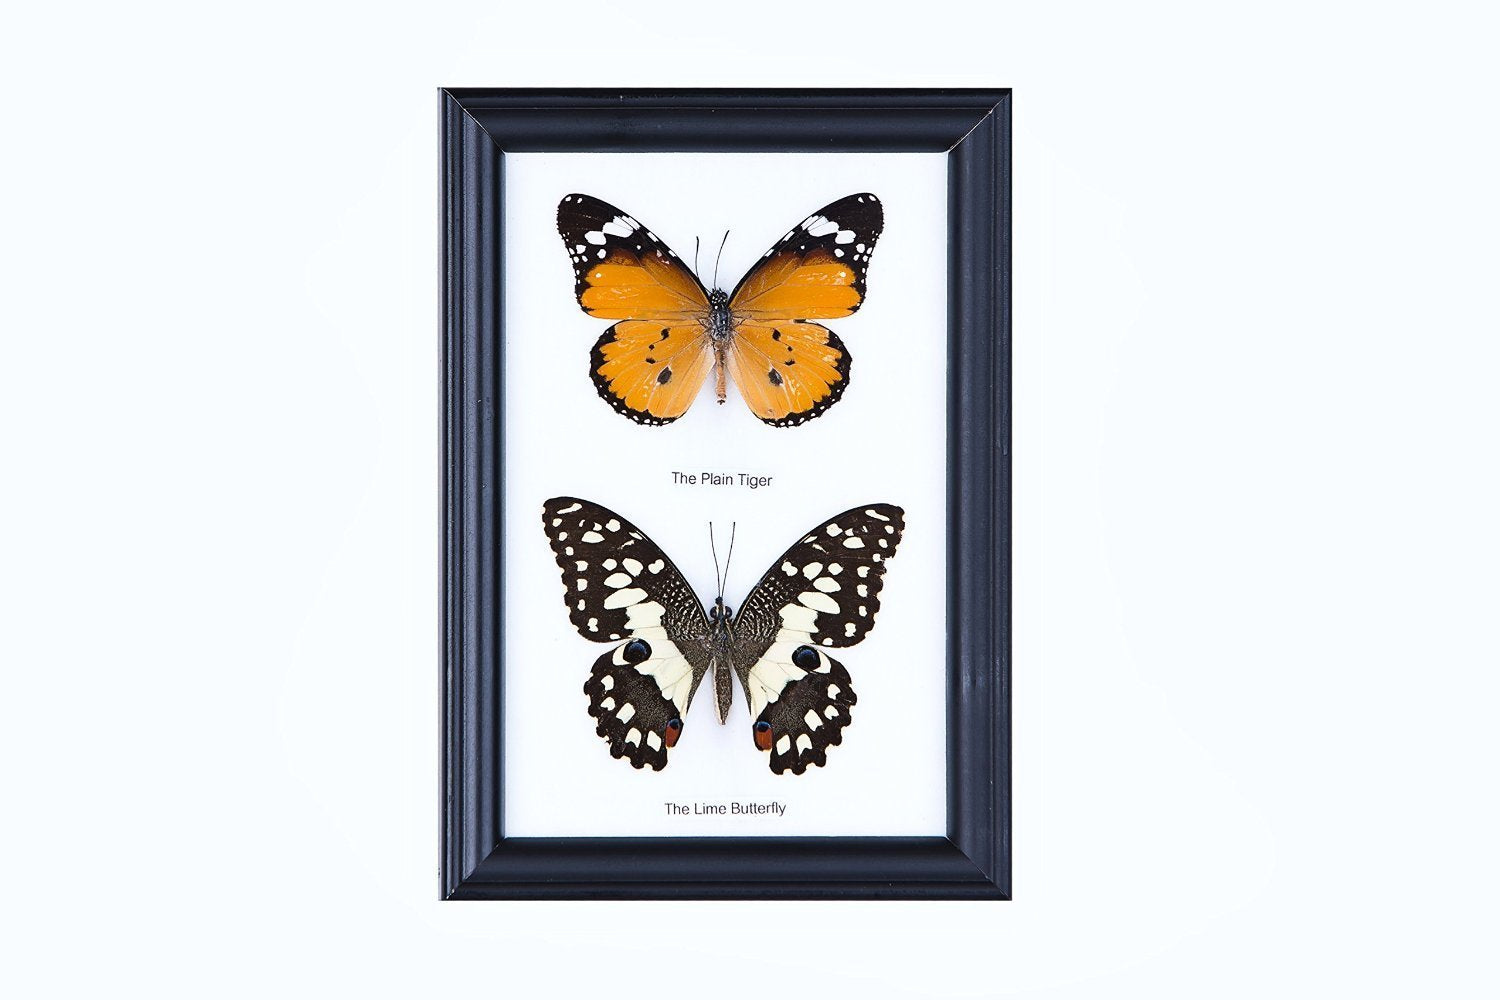 TWO FRAMED BUTTERFLIES, Real Butterflies Mounted Under Glass, Wall Hanging Frame 7 x 5 In. Gift Boxed